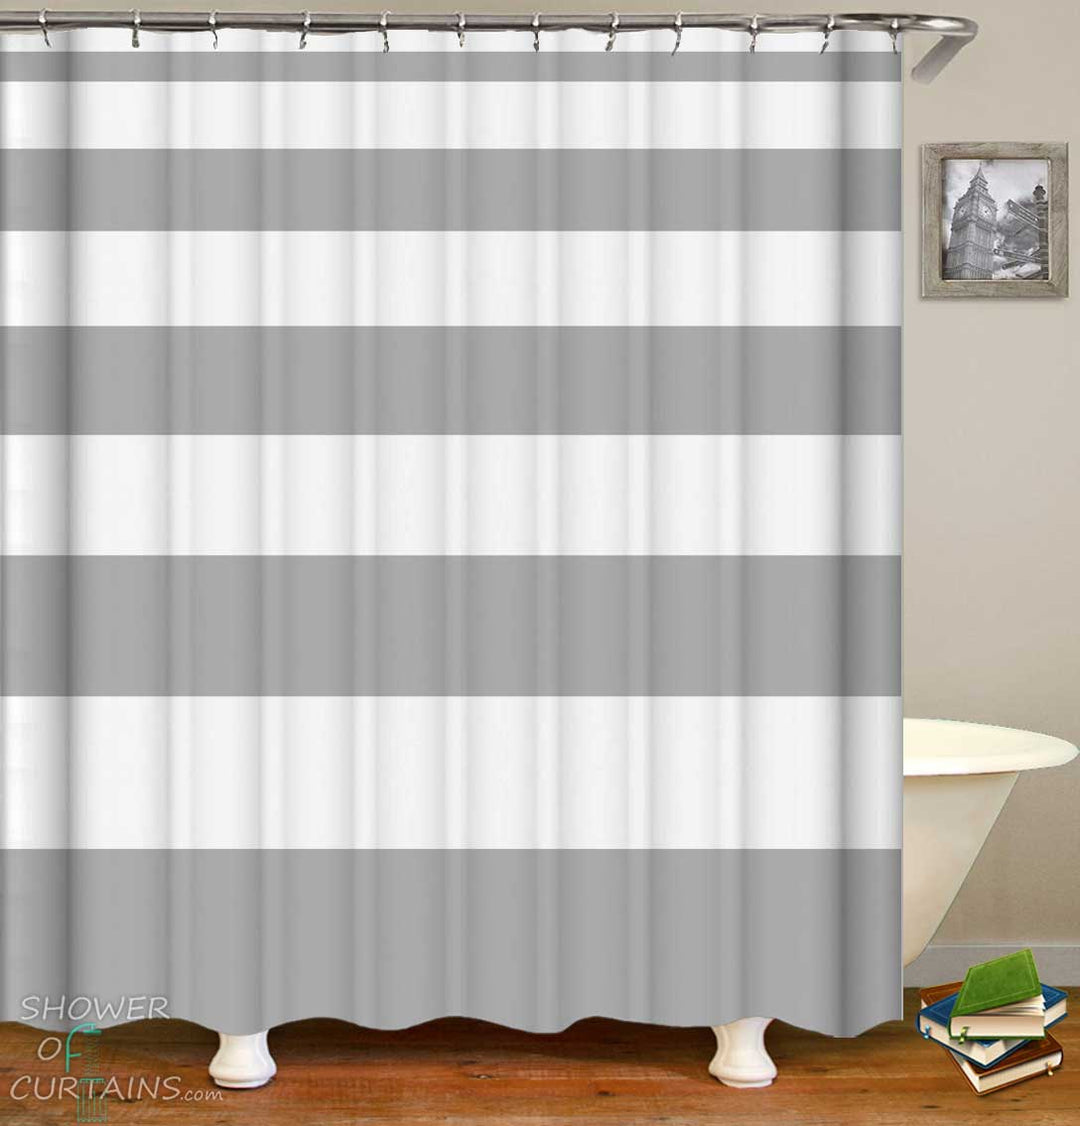 Shower Curtains with Uneven Grey Stripes